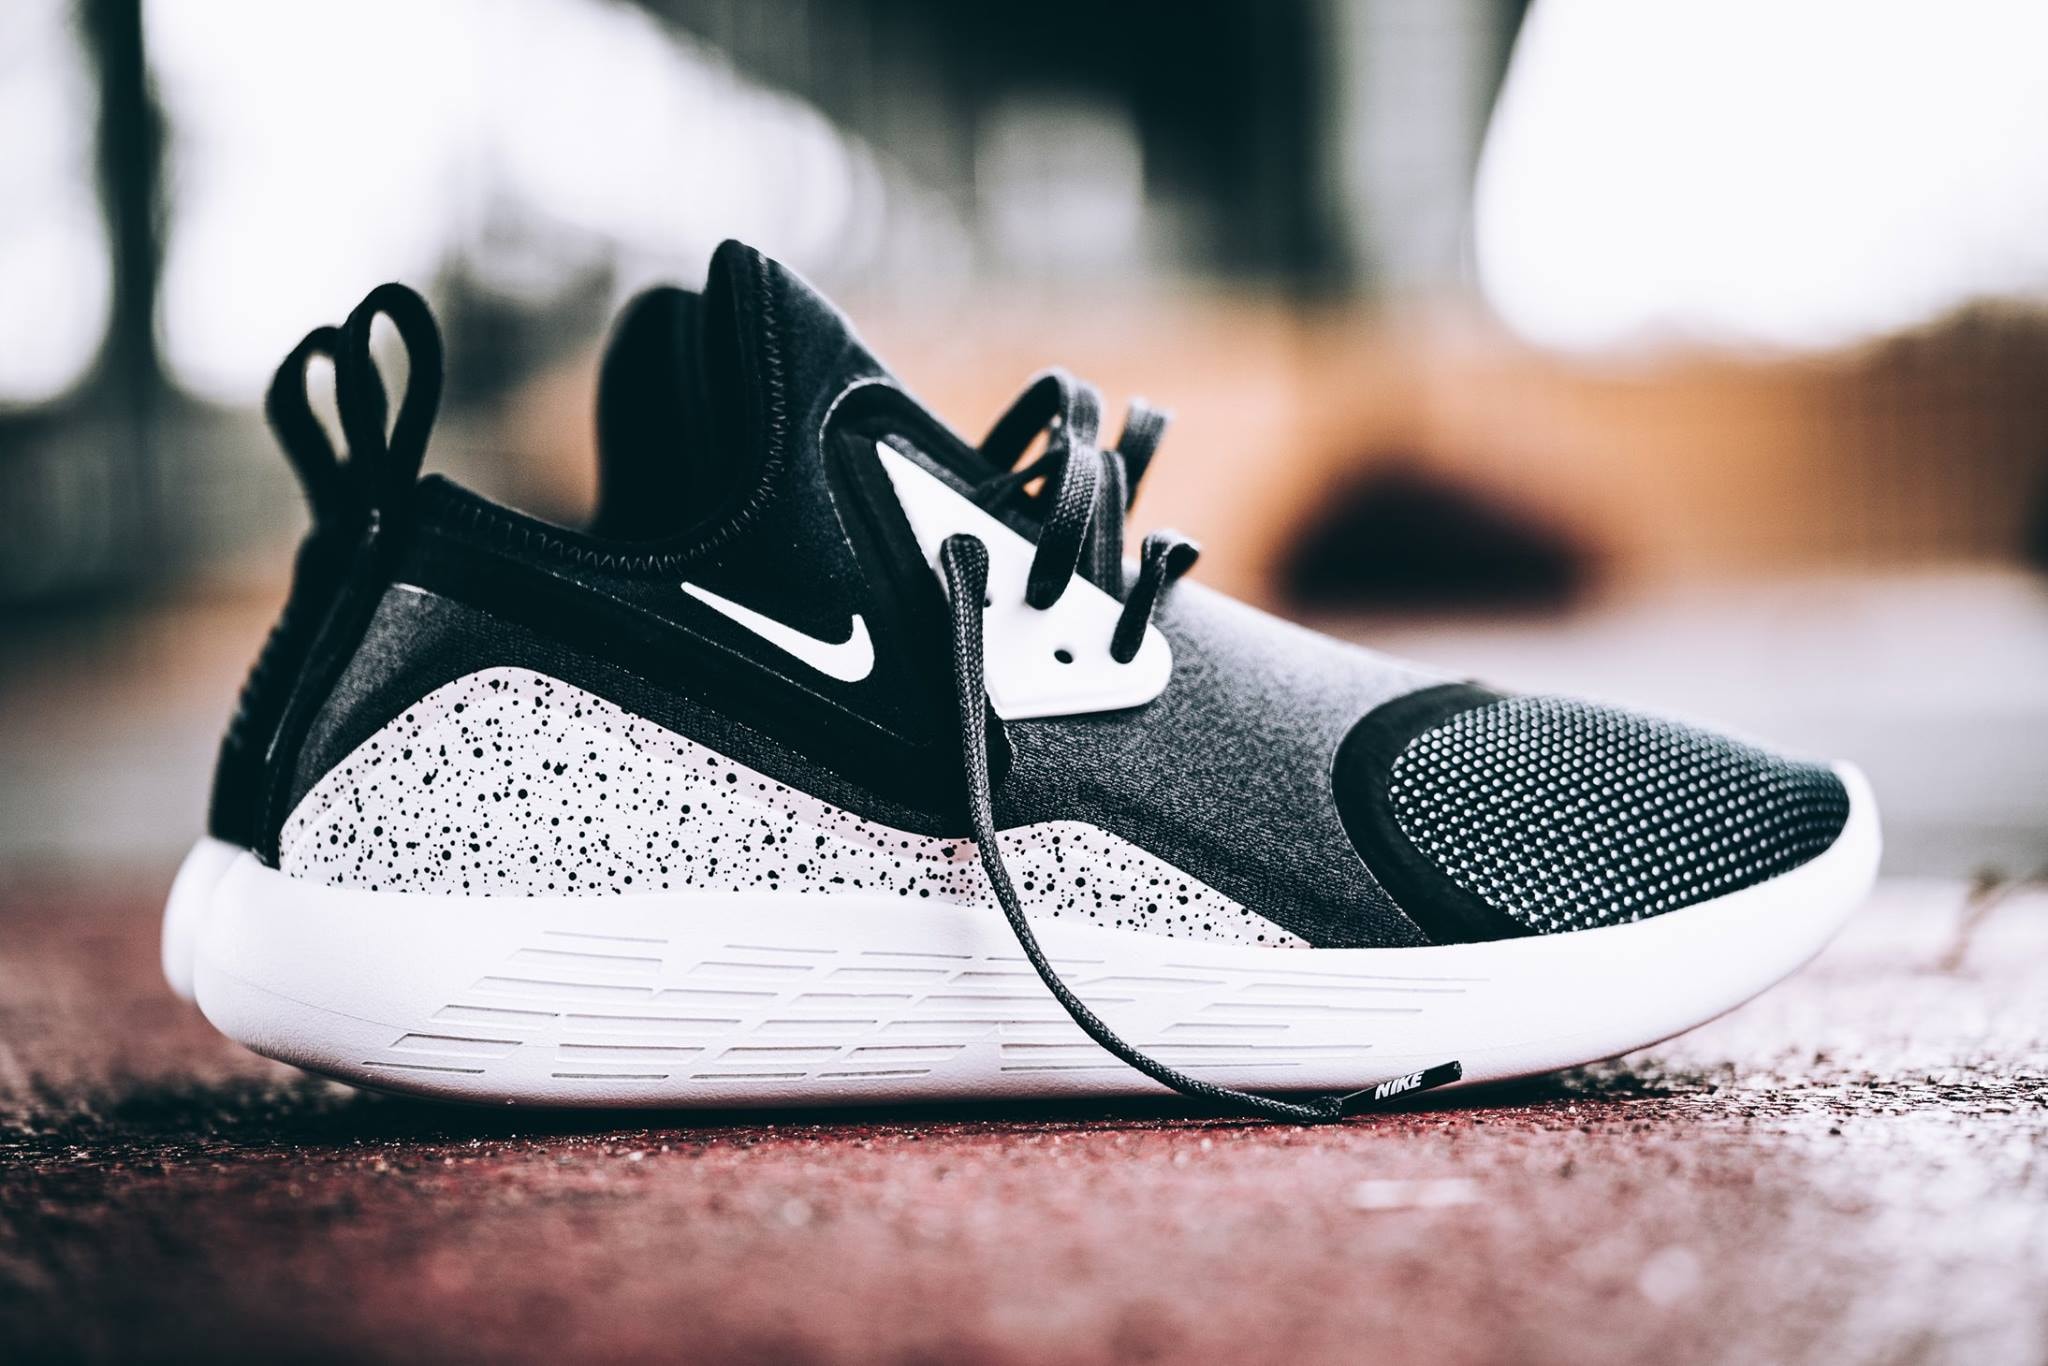 Nike LunarCharge Black/White Closer Look